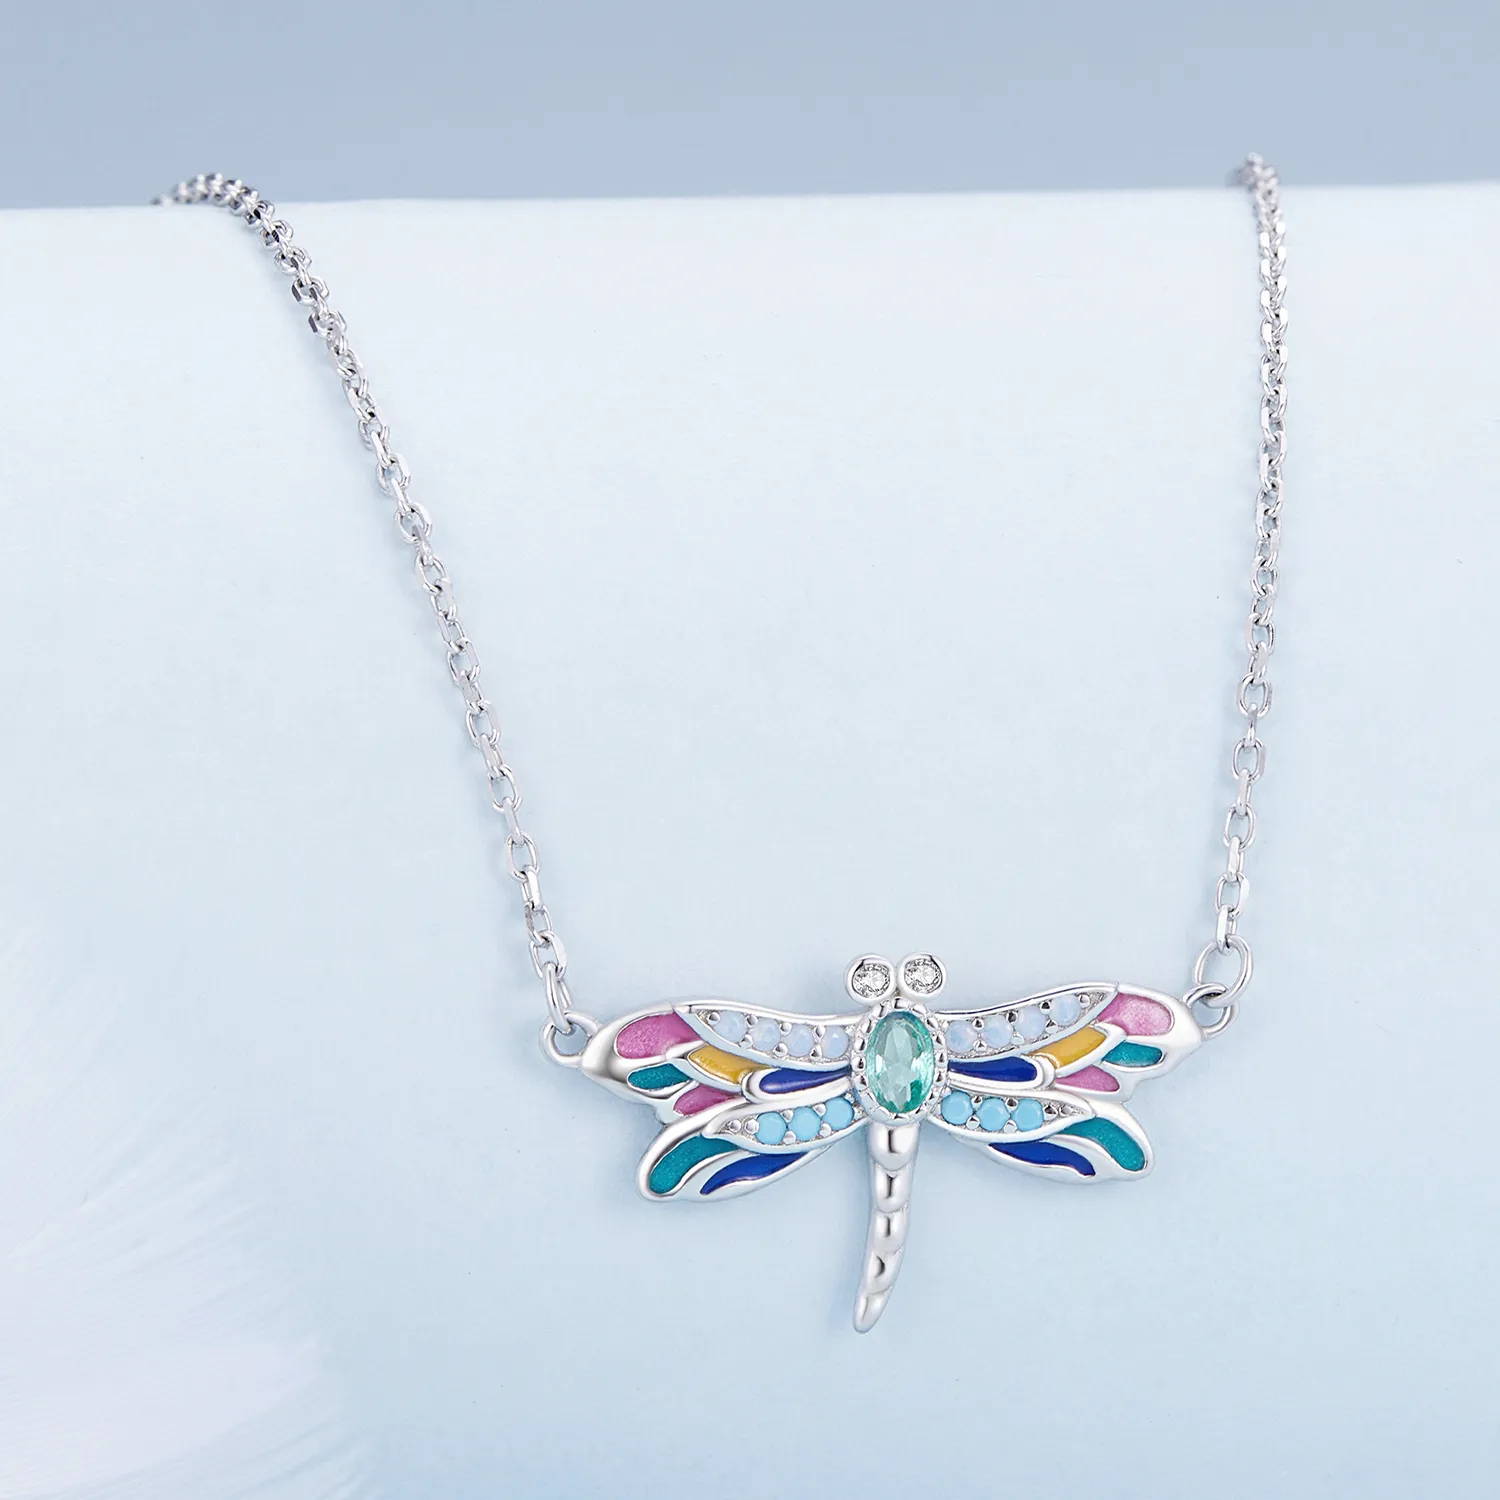 Pandora Style Dragonfly Necklace - BSN348